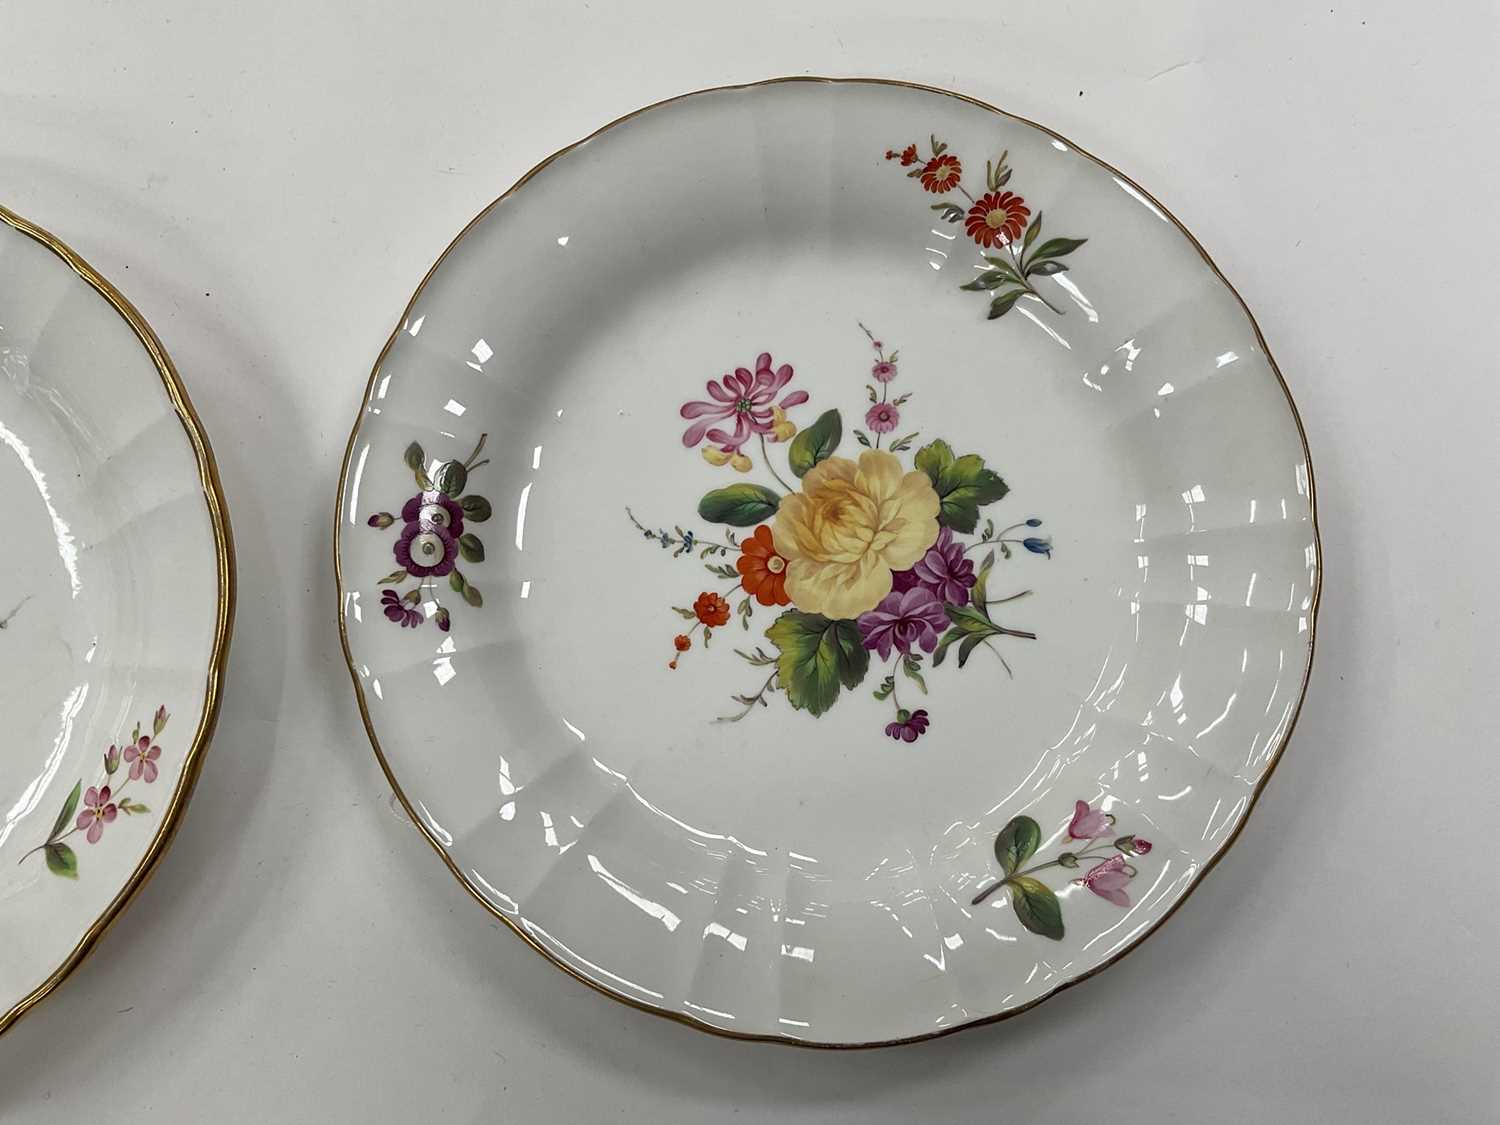 Pair of Wedgwood bone china plates, painted with flowers - Image 6 of 7